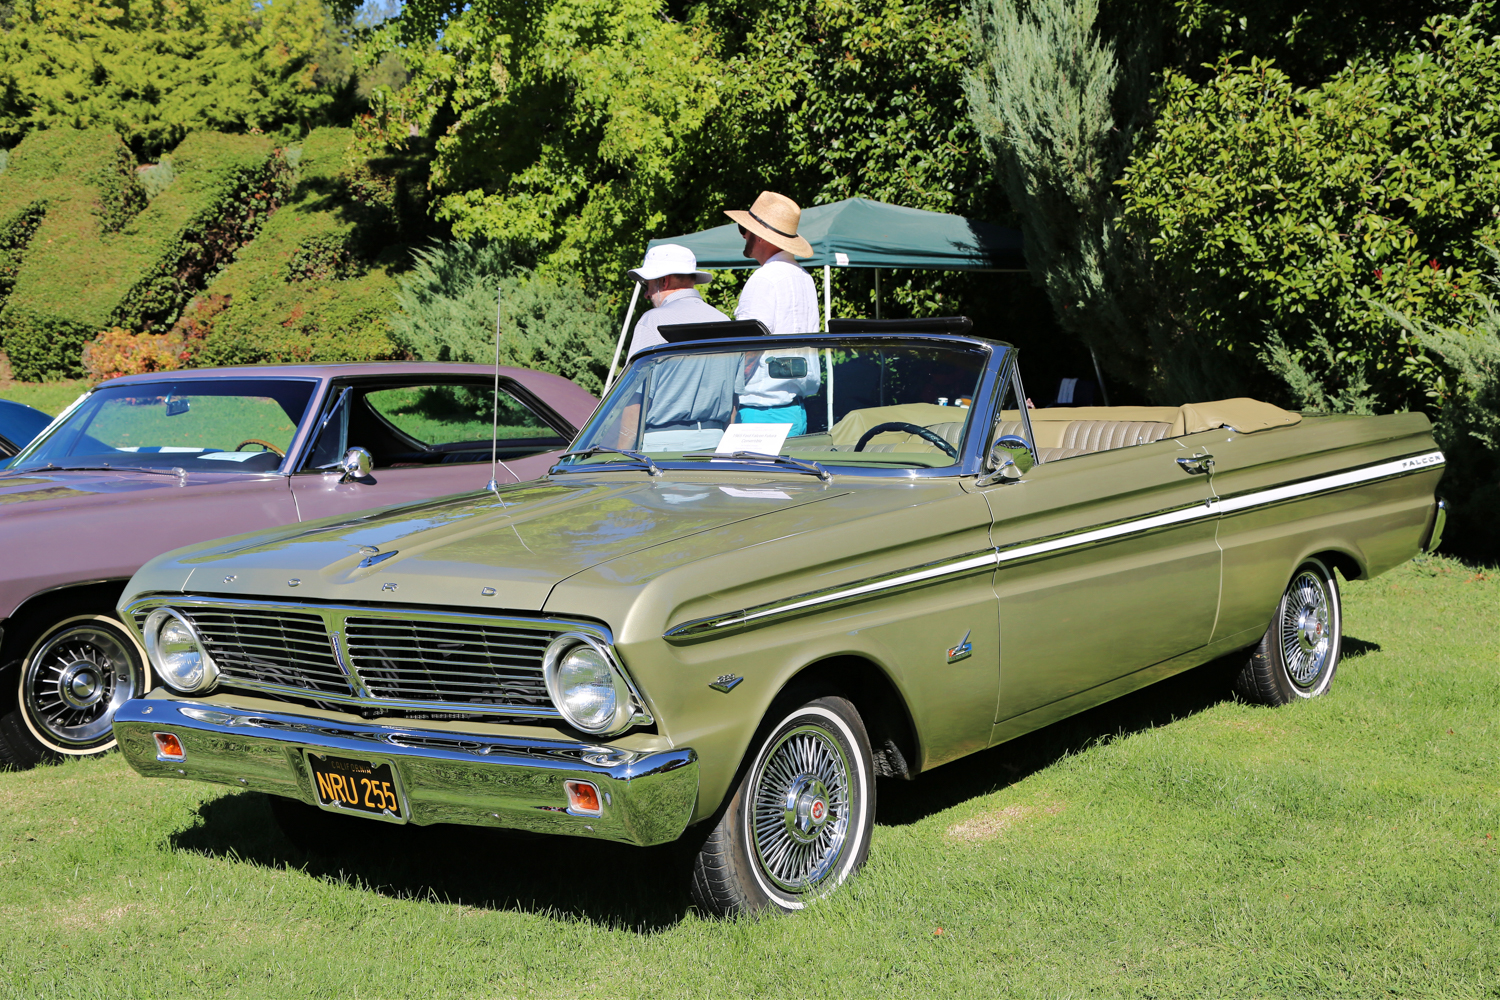 1965 Ford Falcon Convertible  Willem Emmer